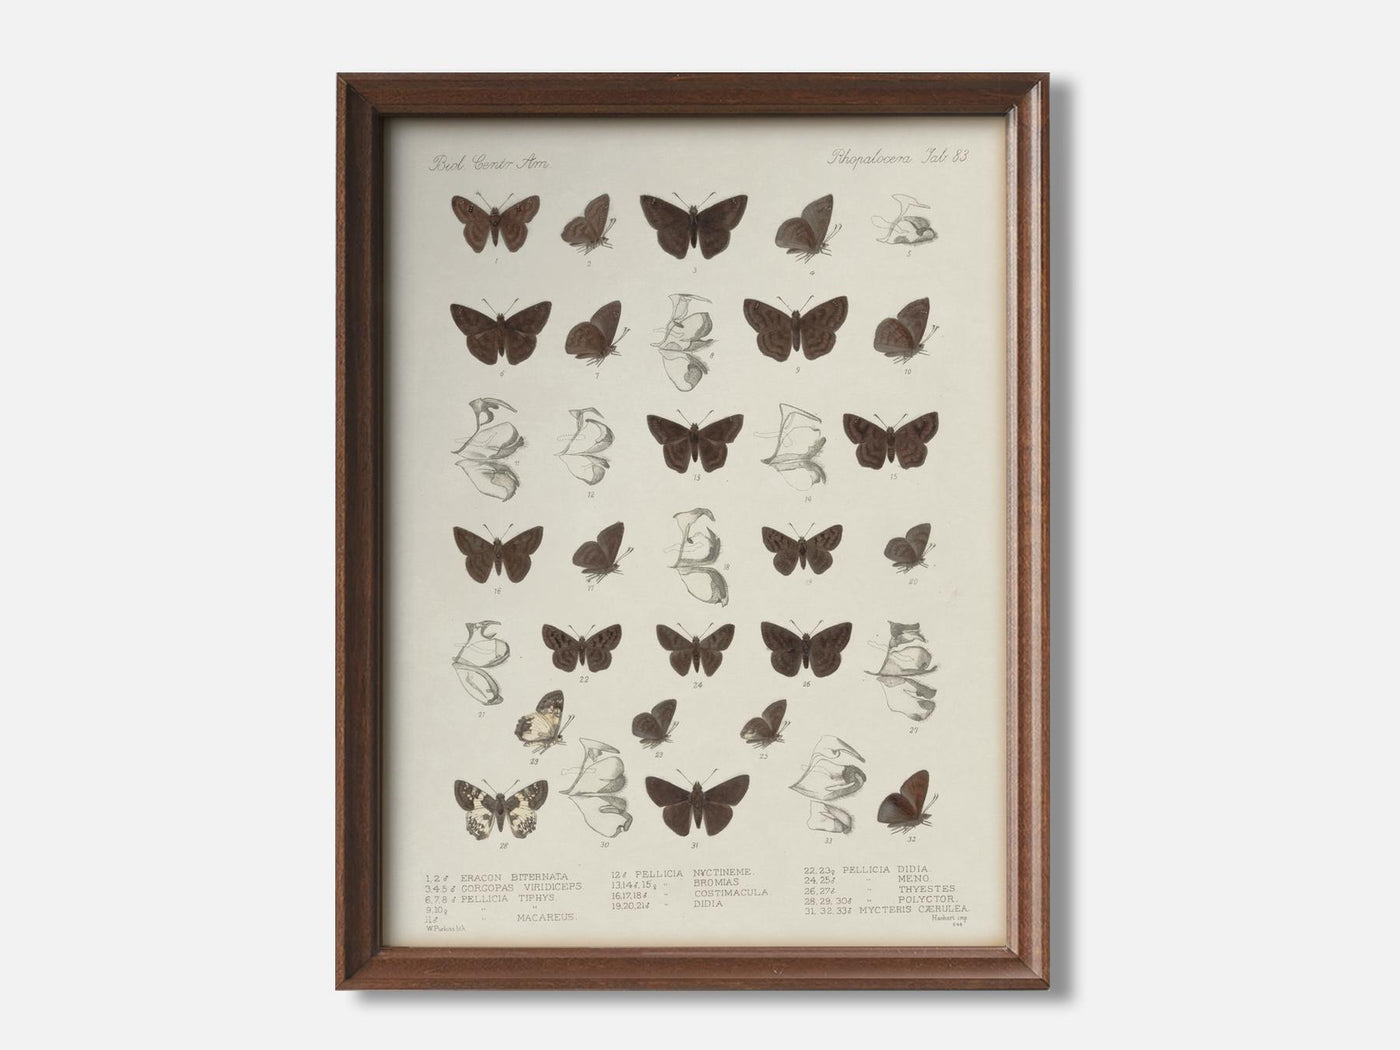 Butterflies - Insecta Lepidoptera mockup - A_ani12-V1-PC_F+WA-SS_1-PS_5x7-C_lpa variant